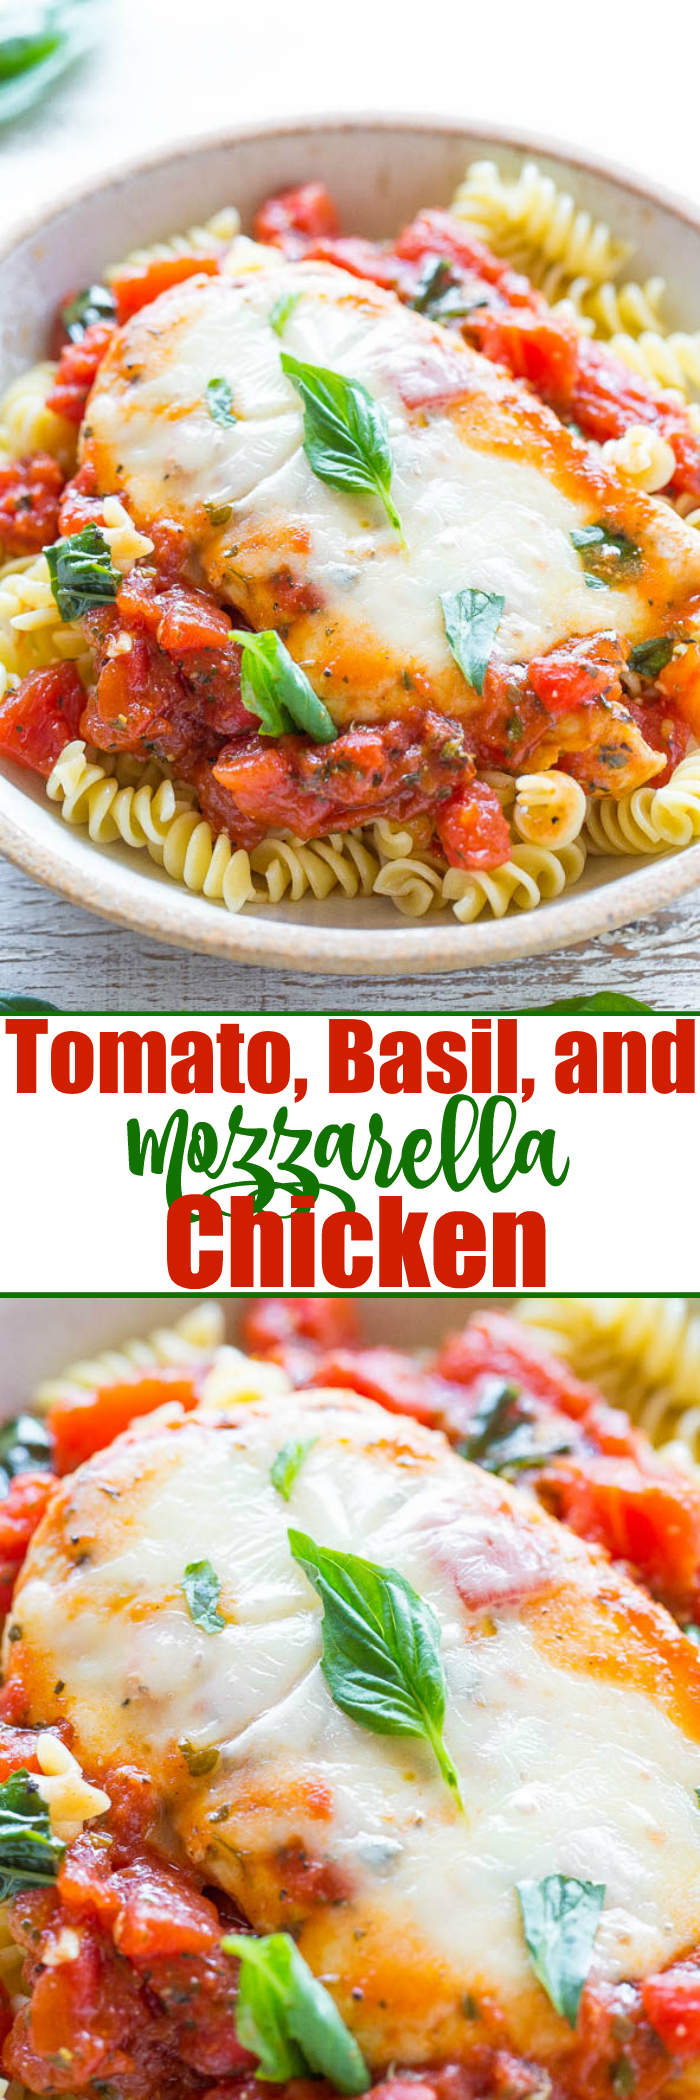 Tomato, Basil, and Mozzarella Chicken - A healthier twist on chicken parmesan because there's NO breaded chicken!! Easy, ready in 20 minutes, and loaded with FLAVOR!! A guaranteed hit that'll be in your regular dinner rotation!